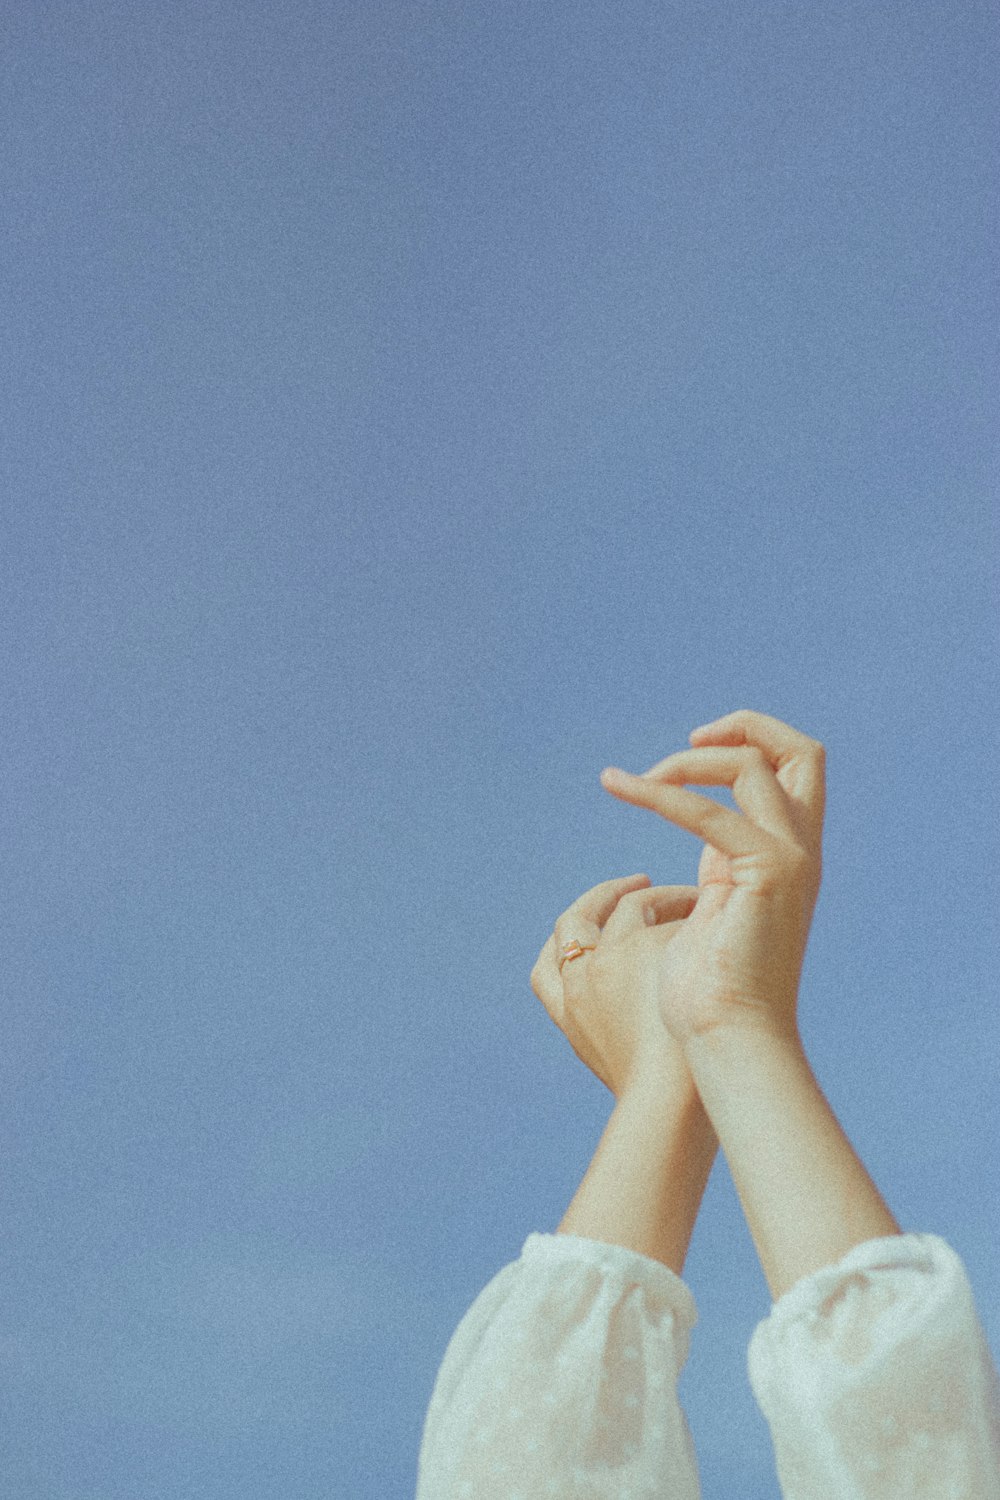 persons hand on blue sky